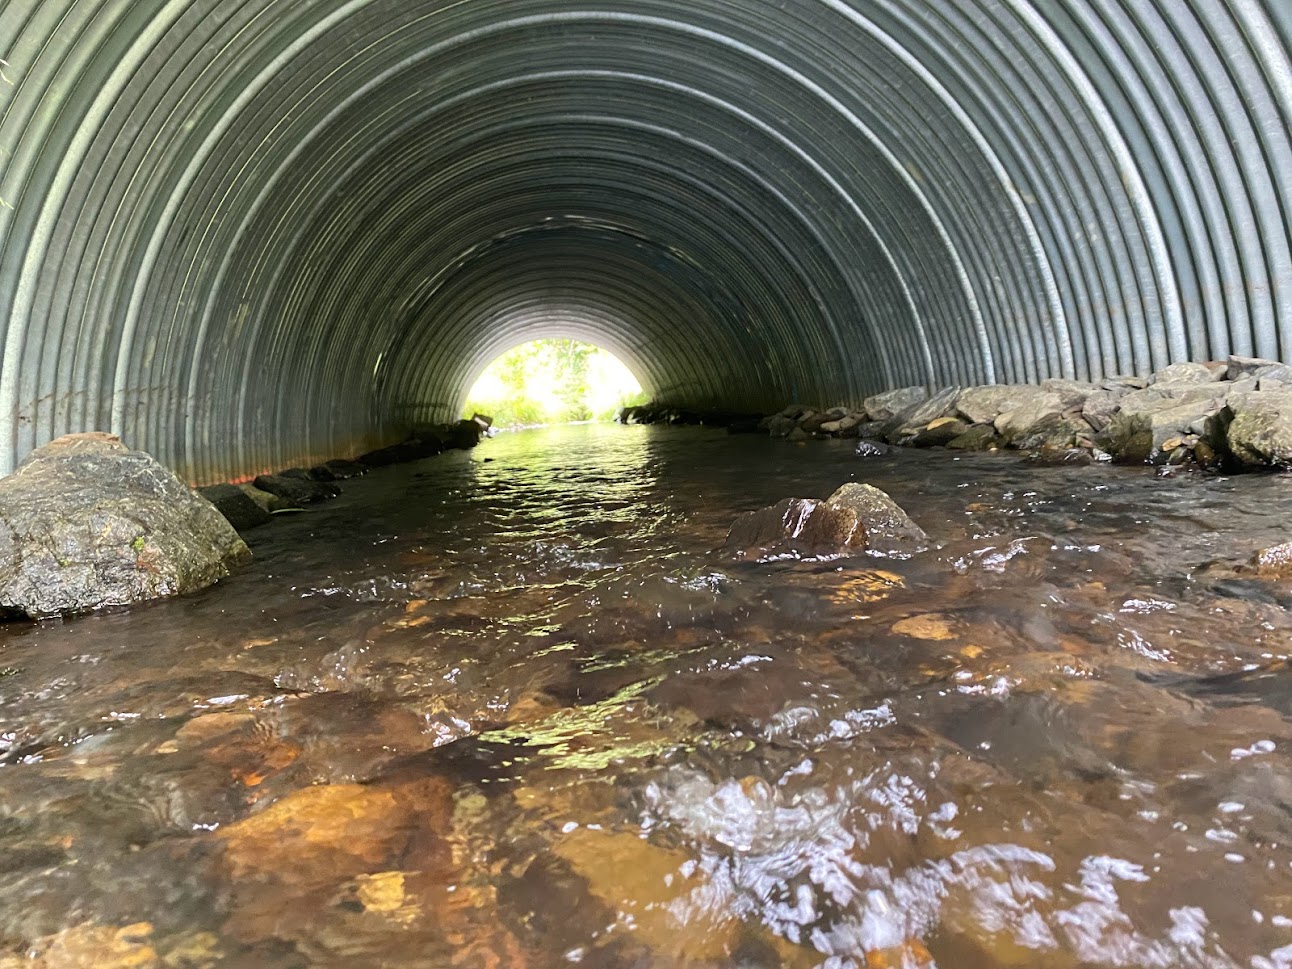 Water flowing through a culvert with a tunnel